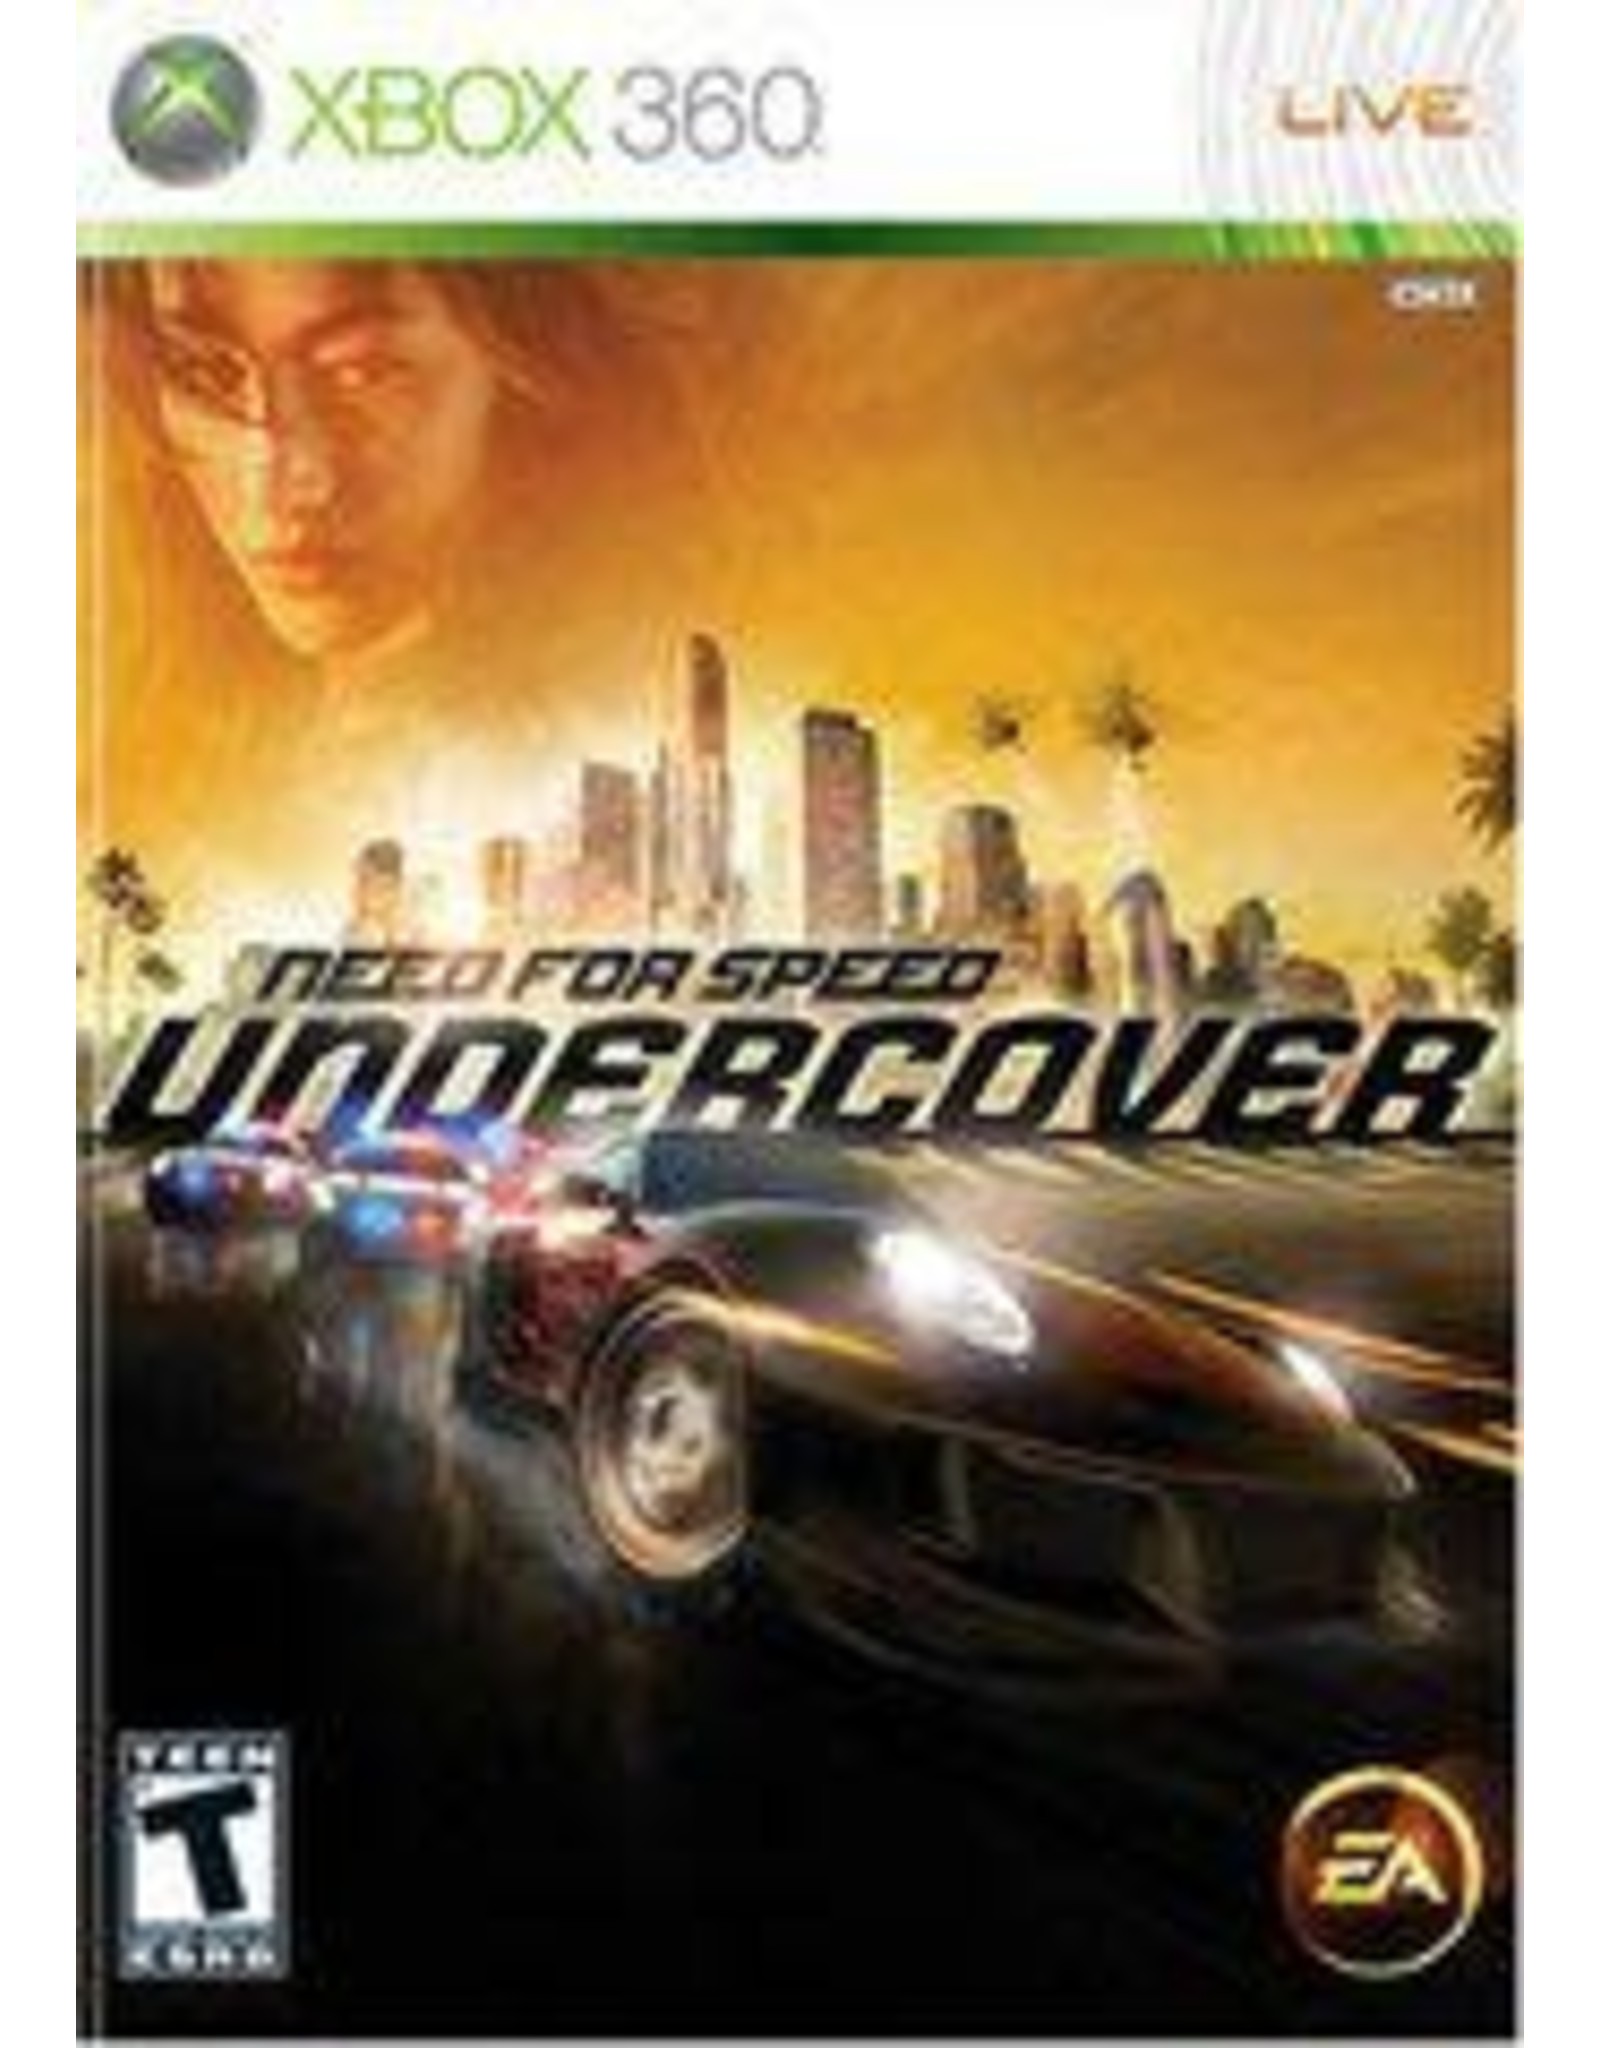 Xbox 360 Need for Speed Undercover (Used)